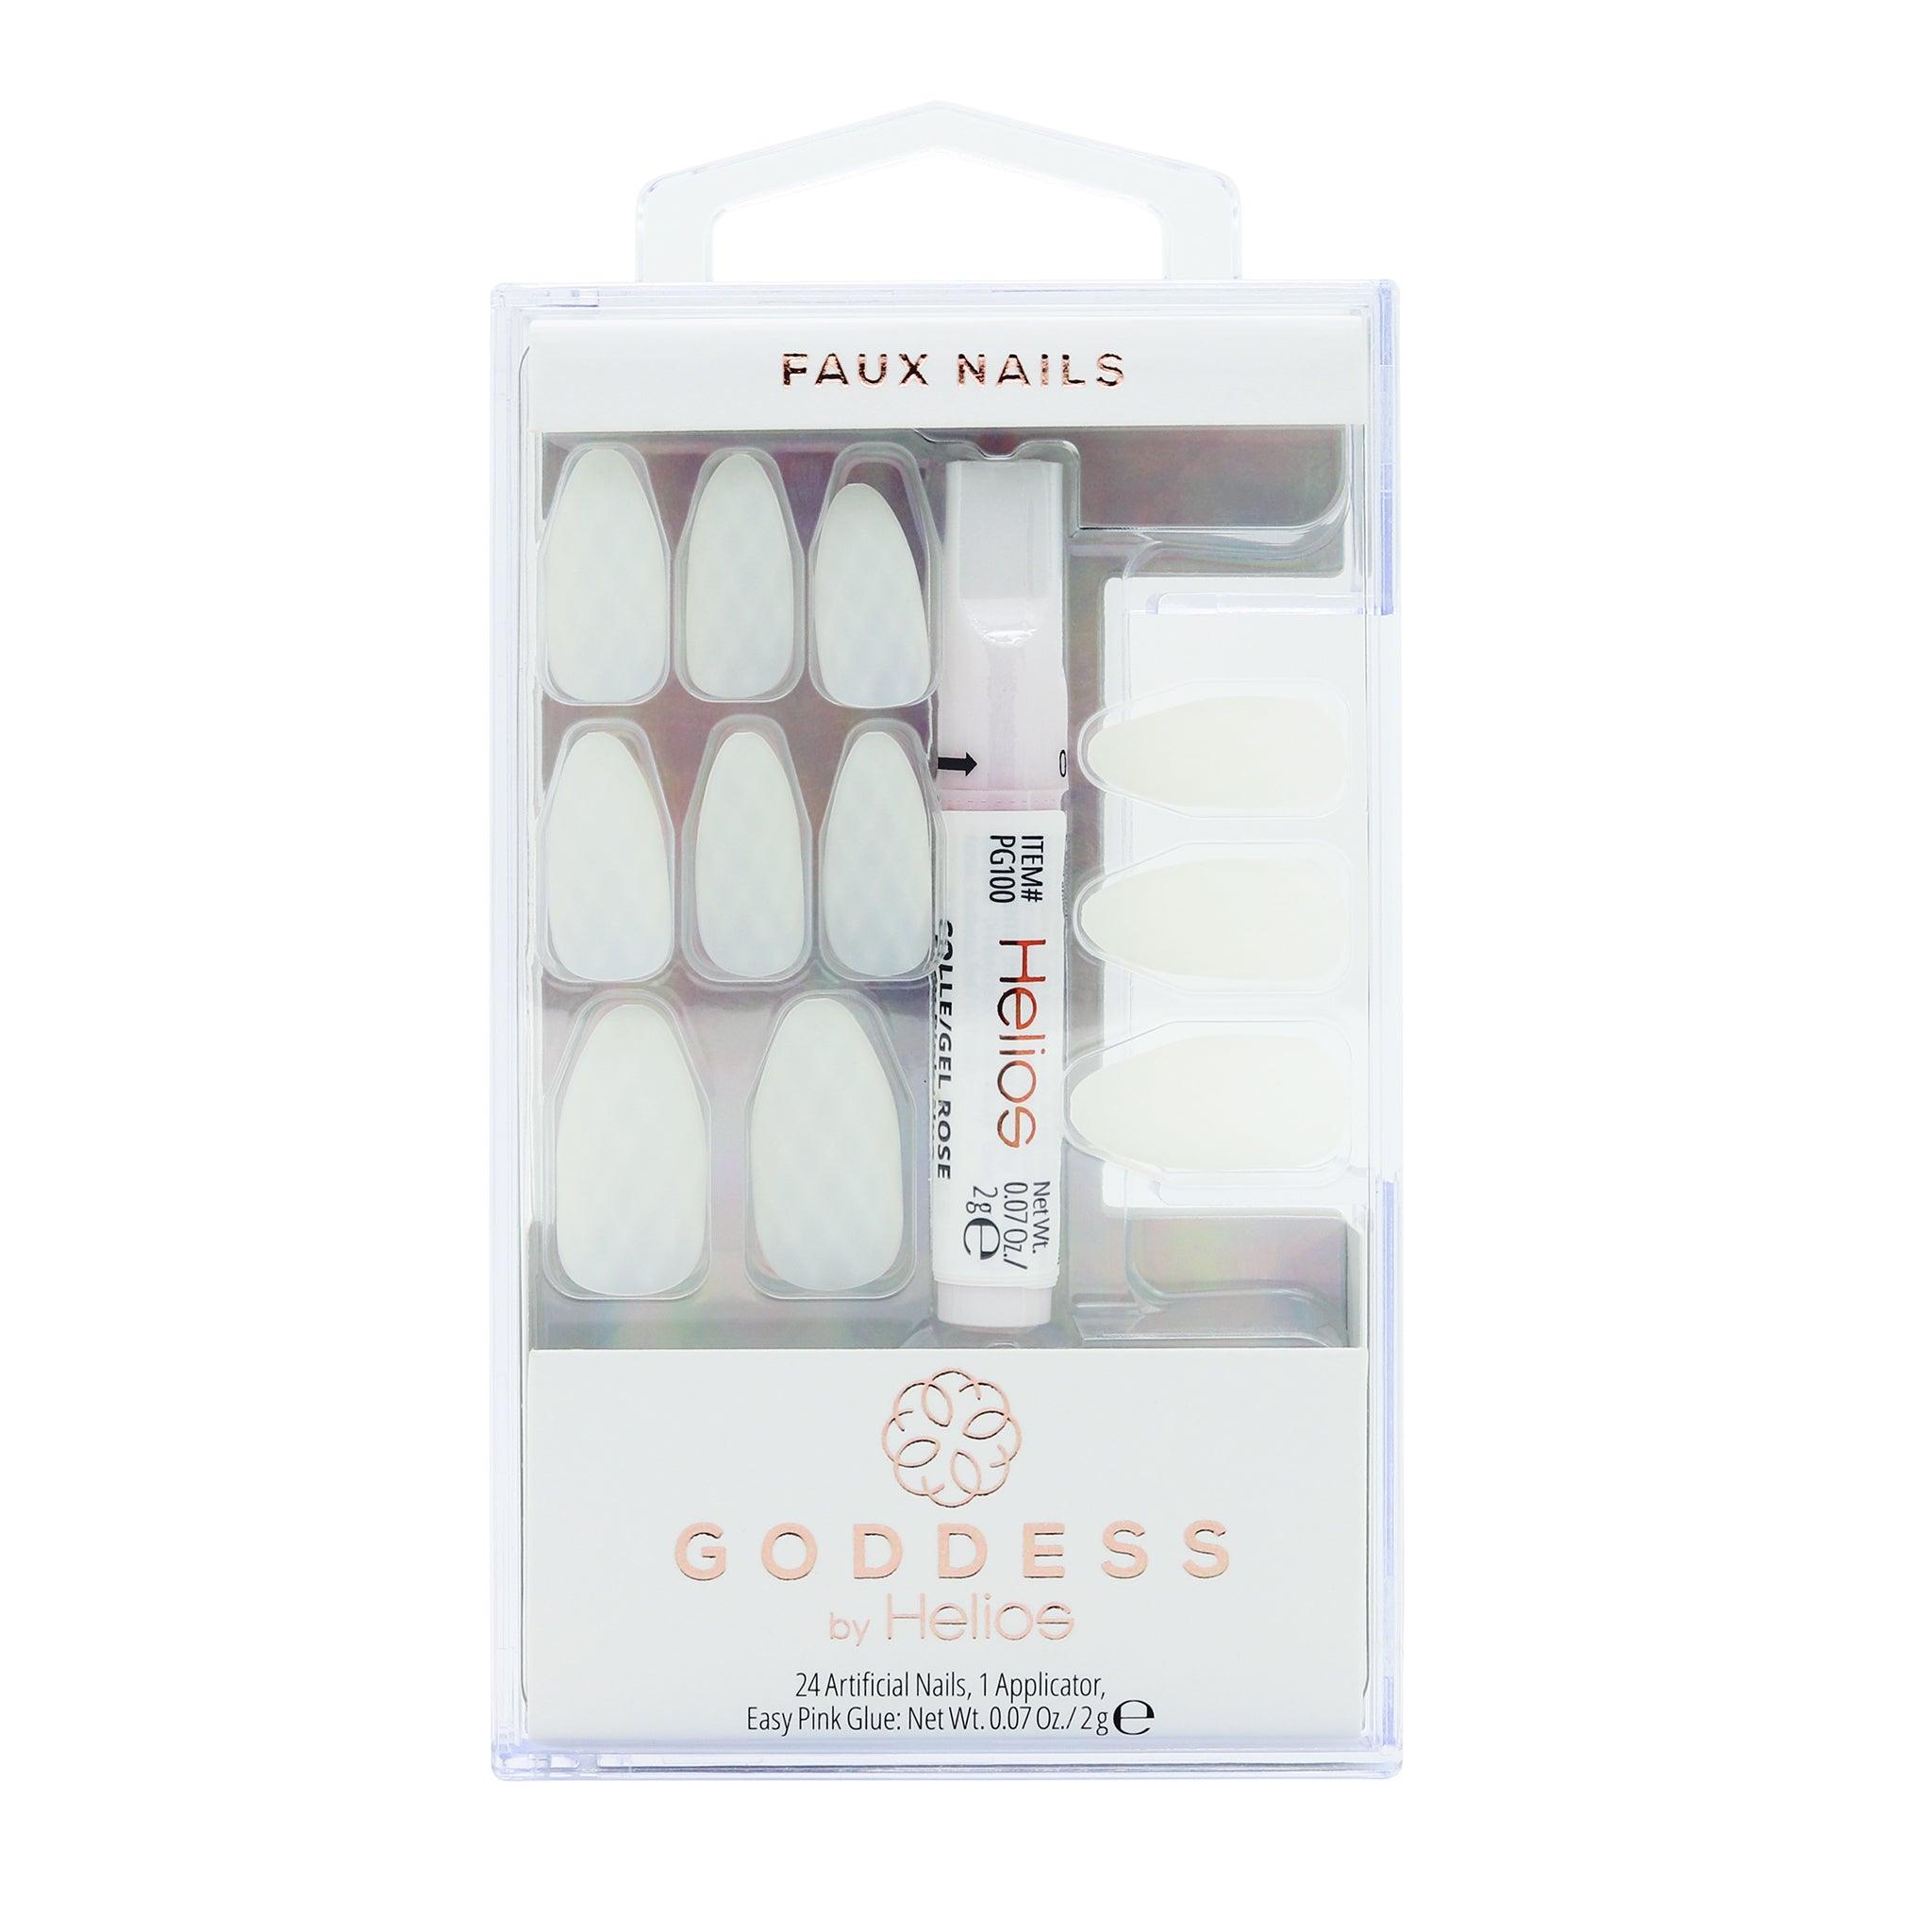 GODDESS ARTIFICIAL NAILS - HGOD0022 - Helios Nail Systems